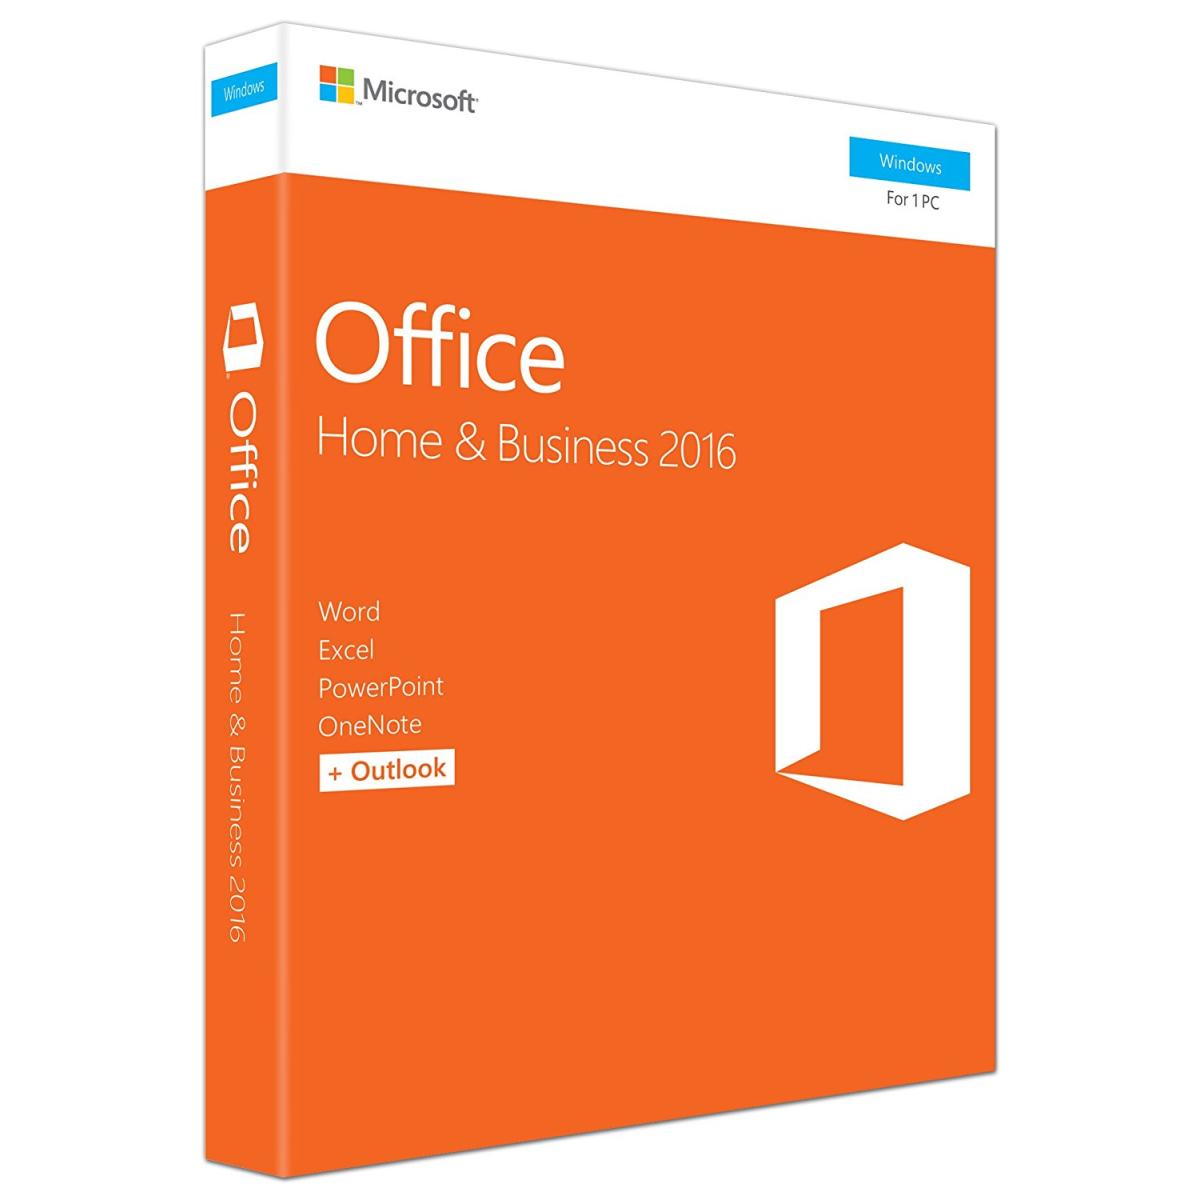 Microsoft Office Home & Business 2016 T5D02700 Smart Systems